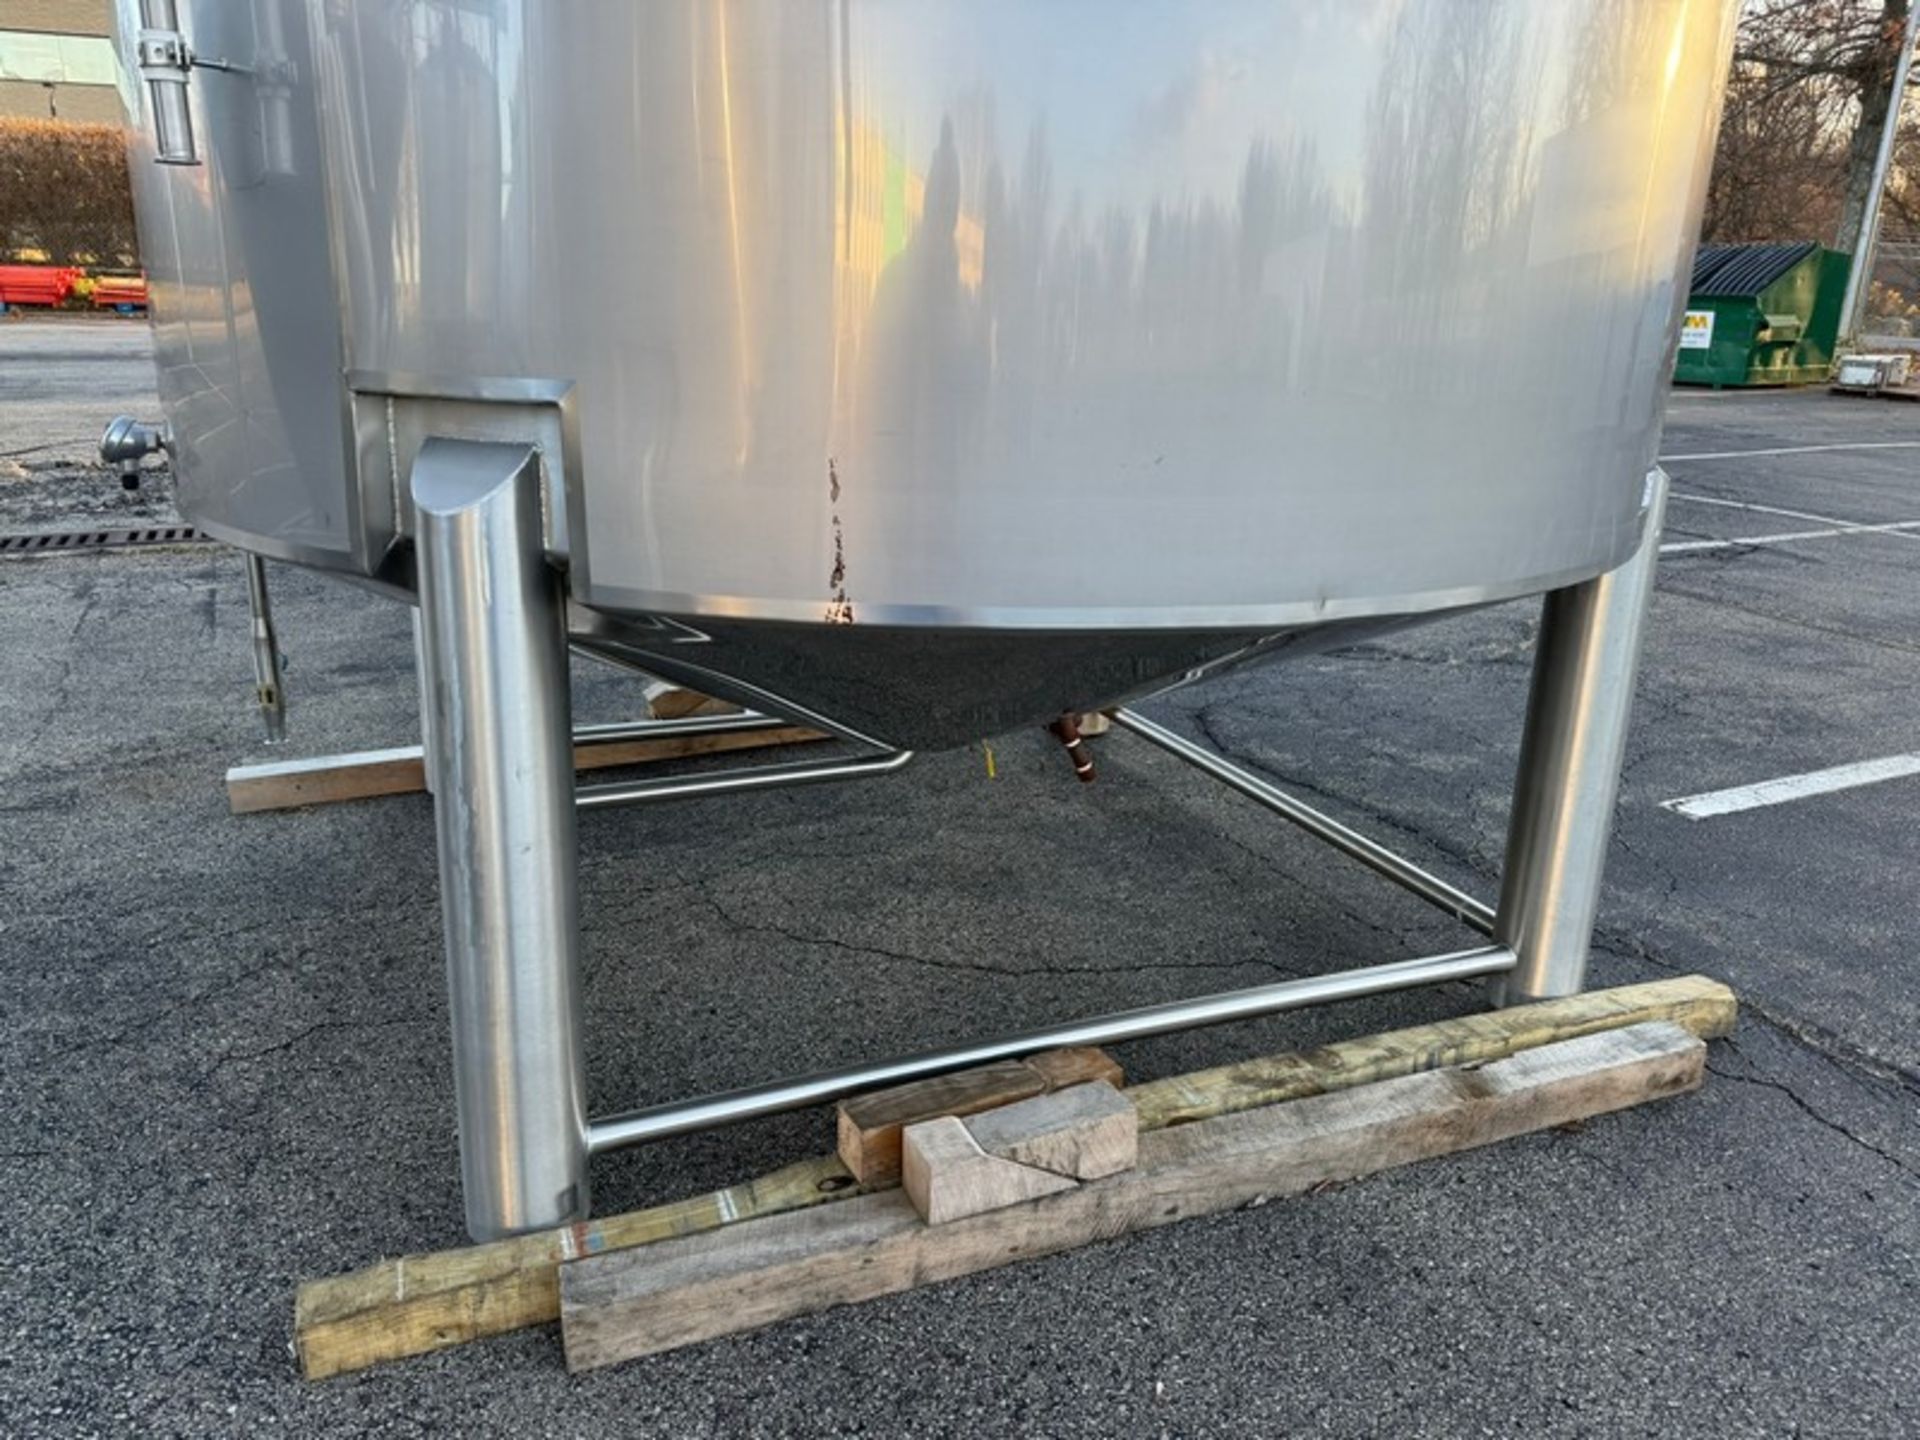 2012 Specific Mechanical Systems 200 BBL Capacity S/S Cold Liquor Tank, S/N RMP-136-12-300, with S/S - Bild 7 aus 10